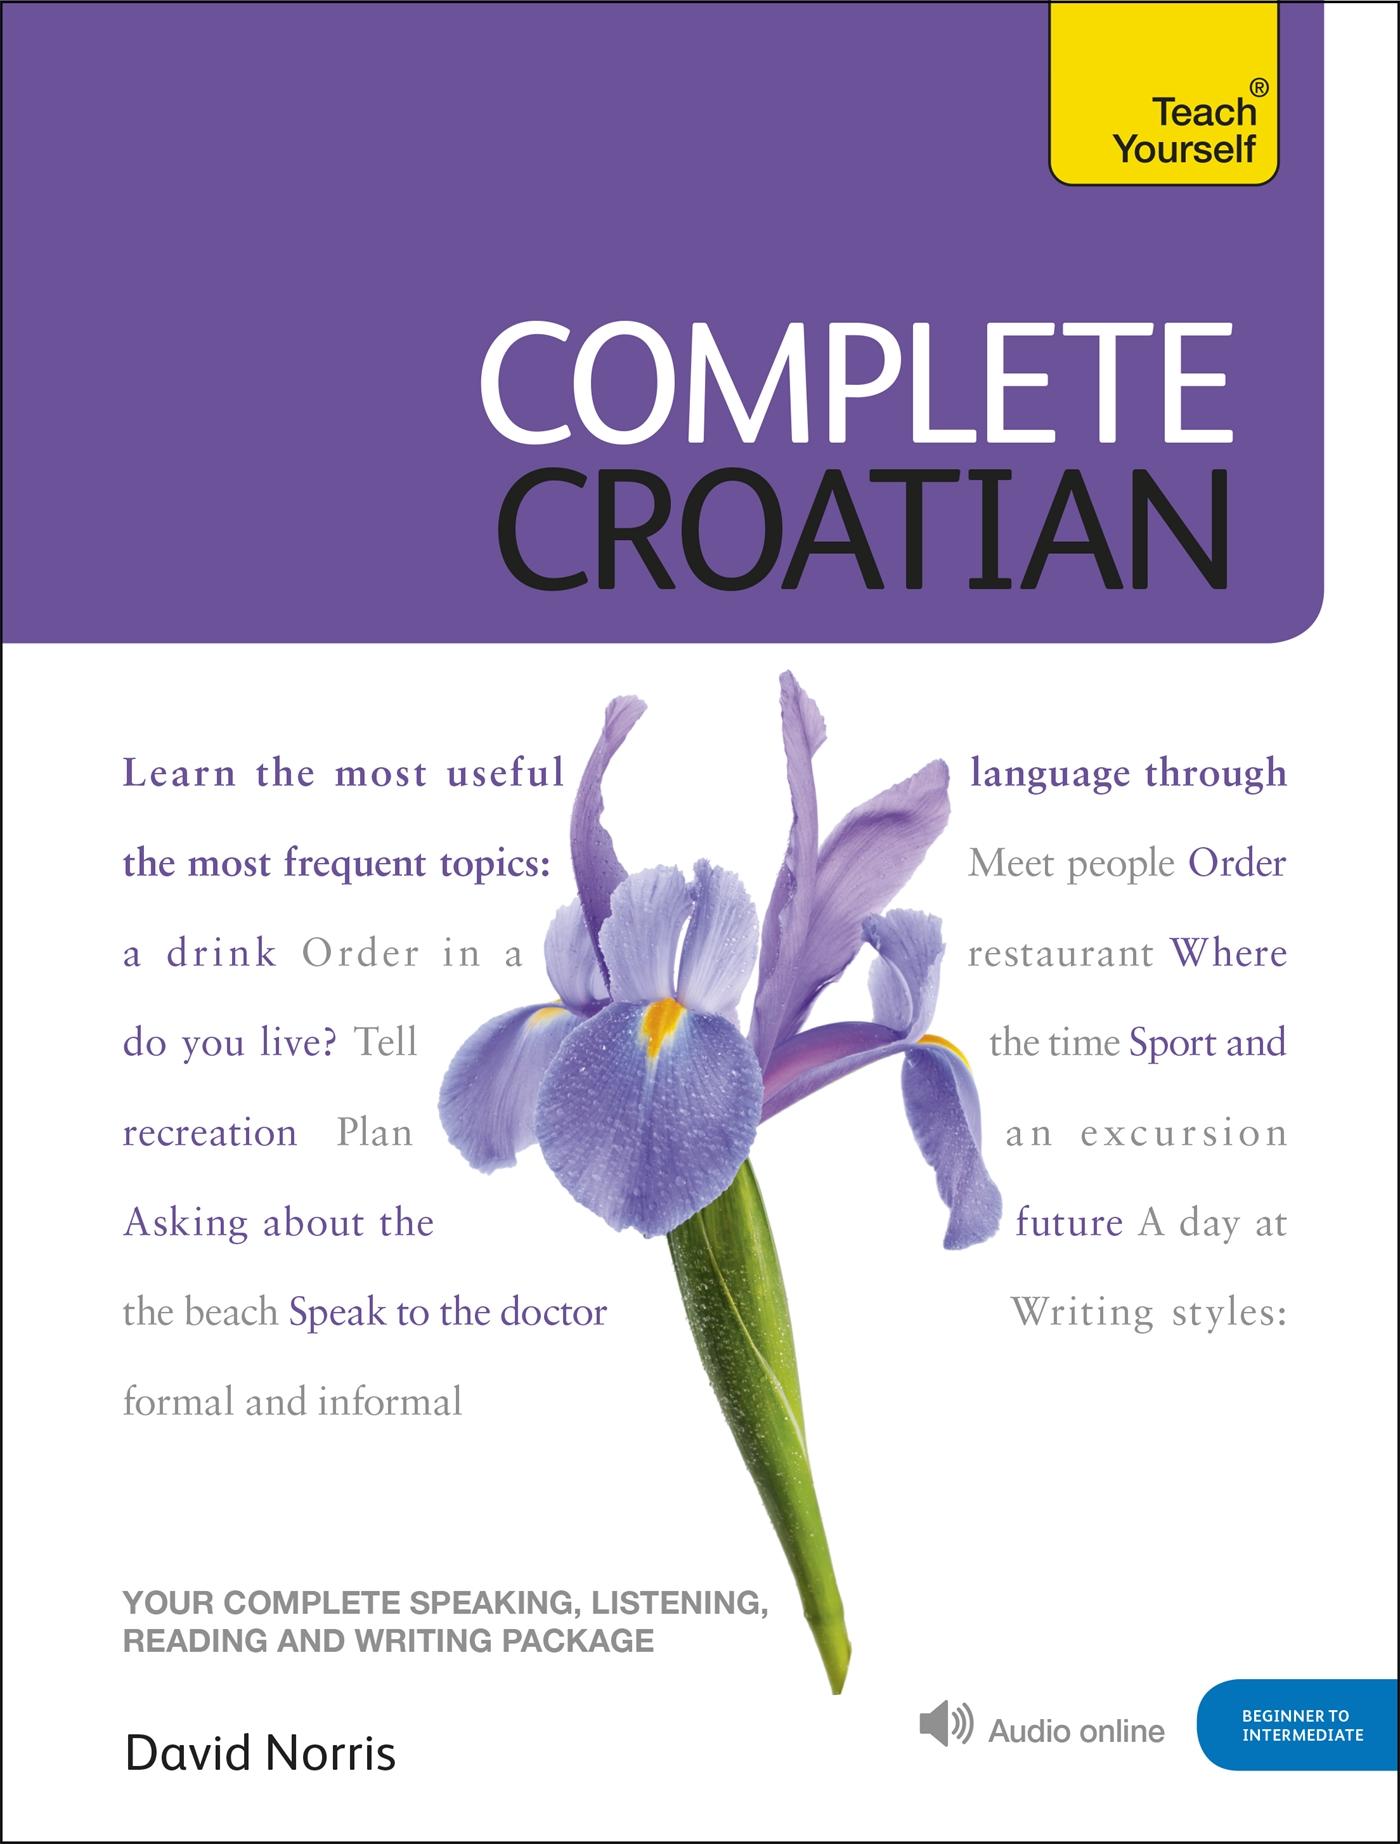 Complete Croatian Book/CD Pack: Teach Yourself | (Book and audio support) | David Norris | Taschenbuch | Bundle | Englisch | 2010 | Hodder And Stoughton Ltd. | EAN 9781444102321 - Norris, David